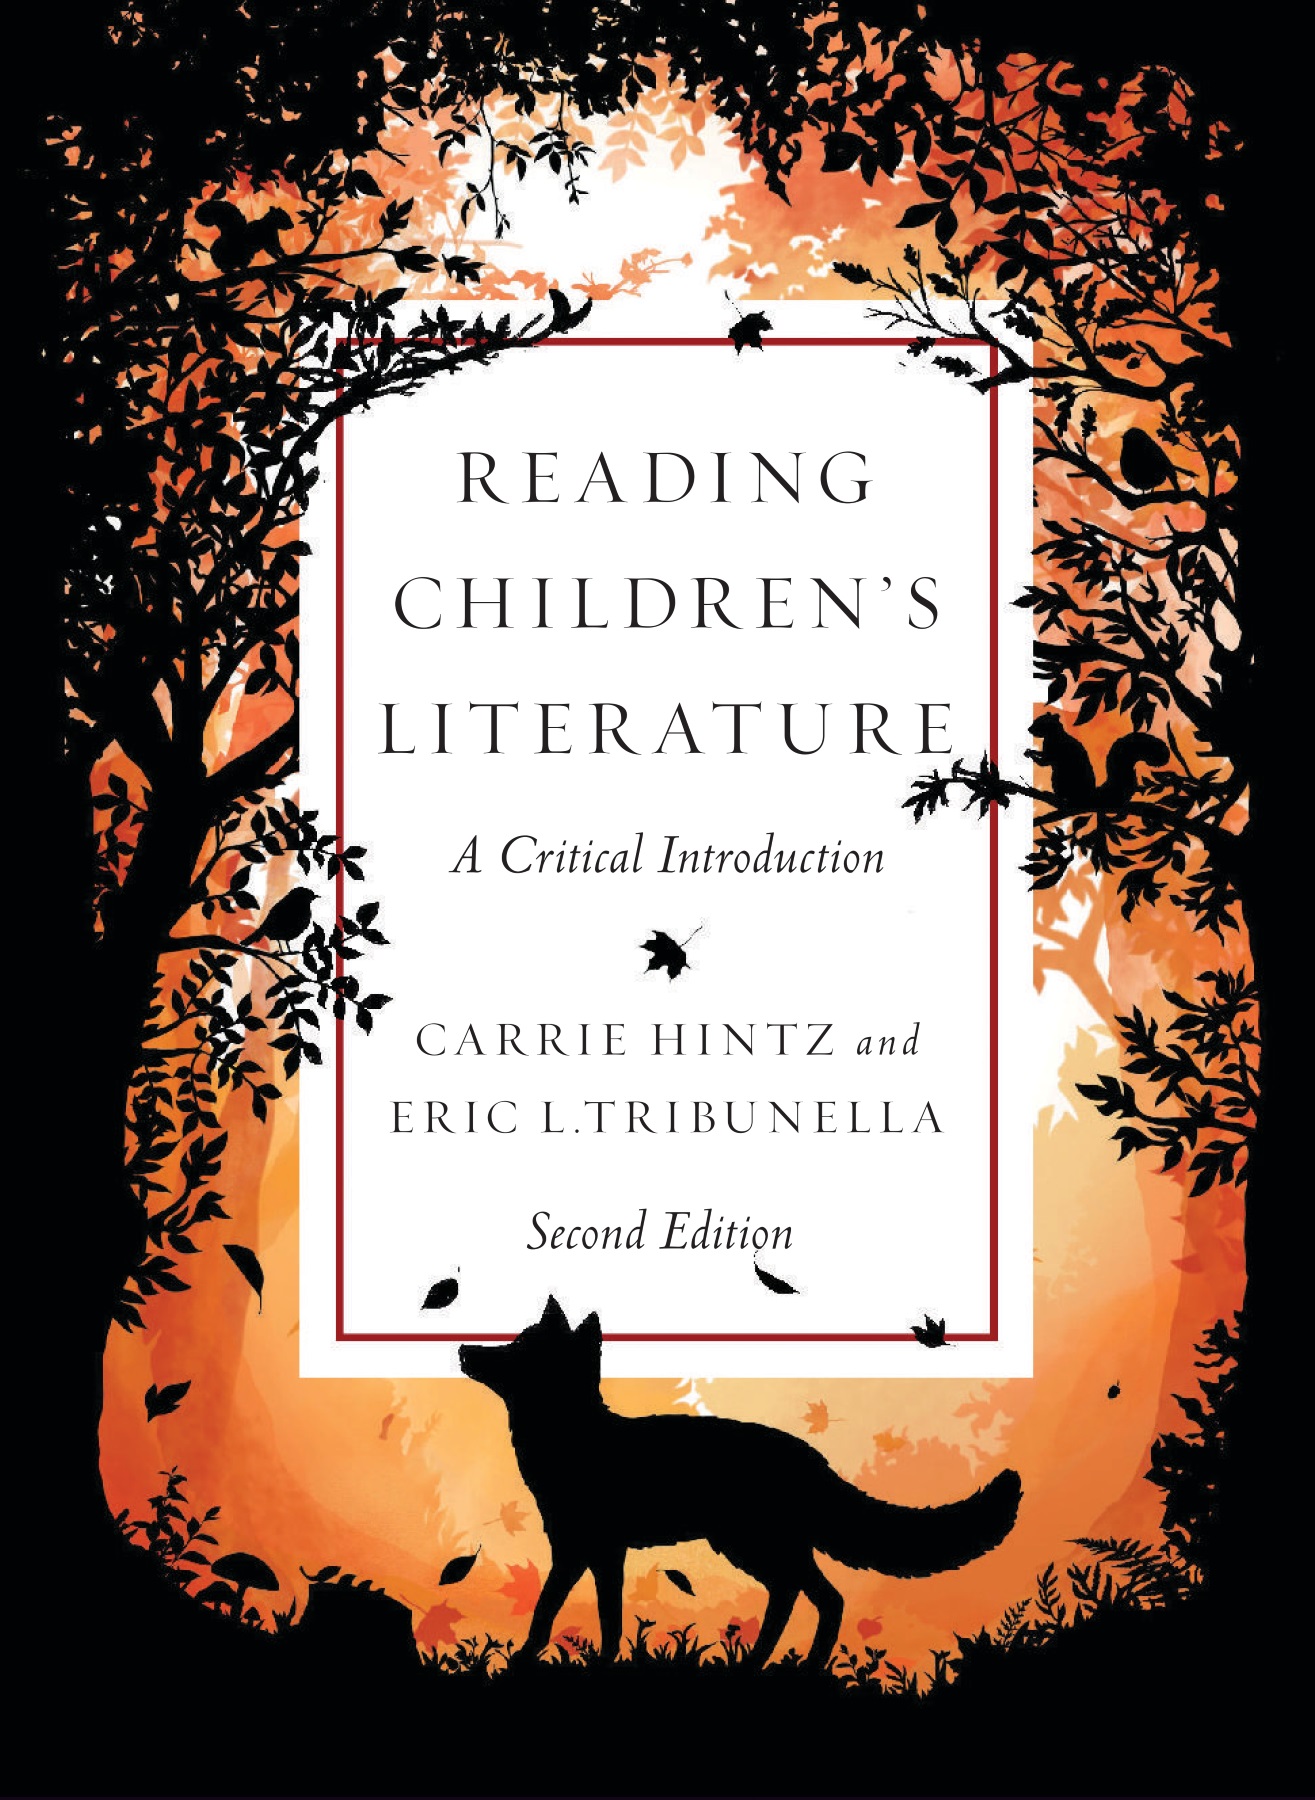 Cover image of Reading Children's Literature by Carrie Hintz and Eric Tribunella